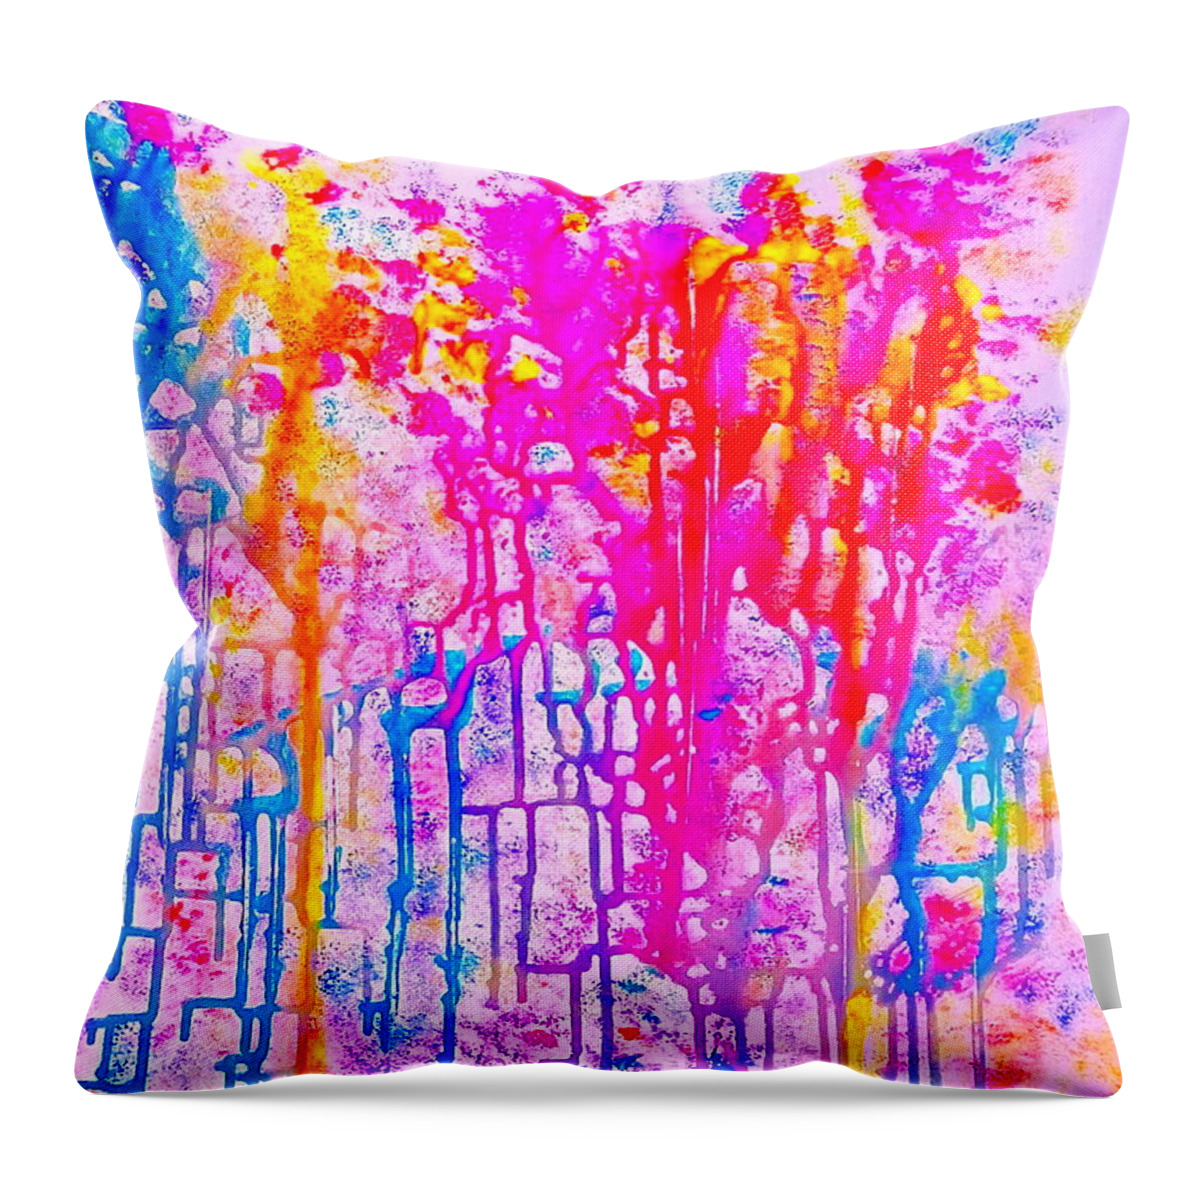 Abstract Art Print Throw Pillow featuring the painting Corals by Monique Wegmueller